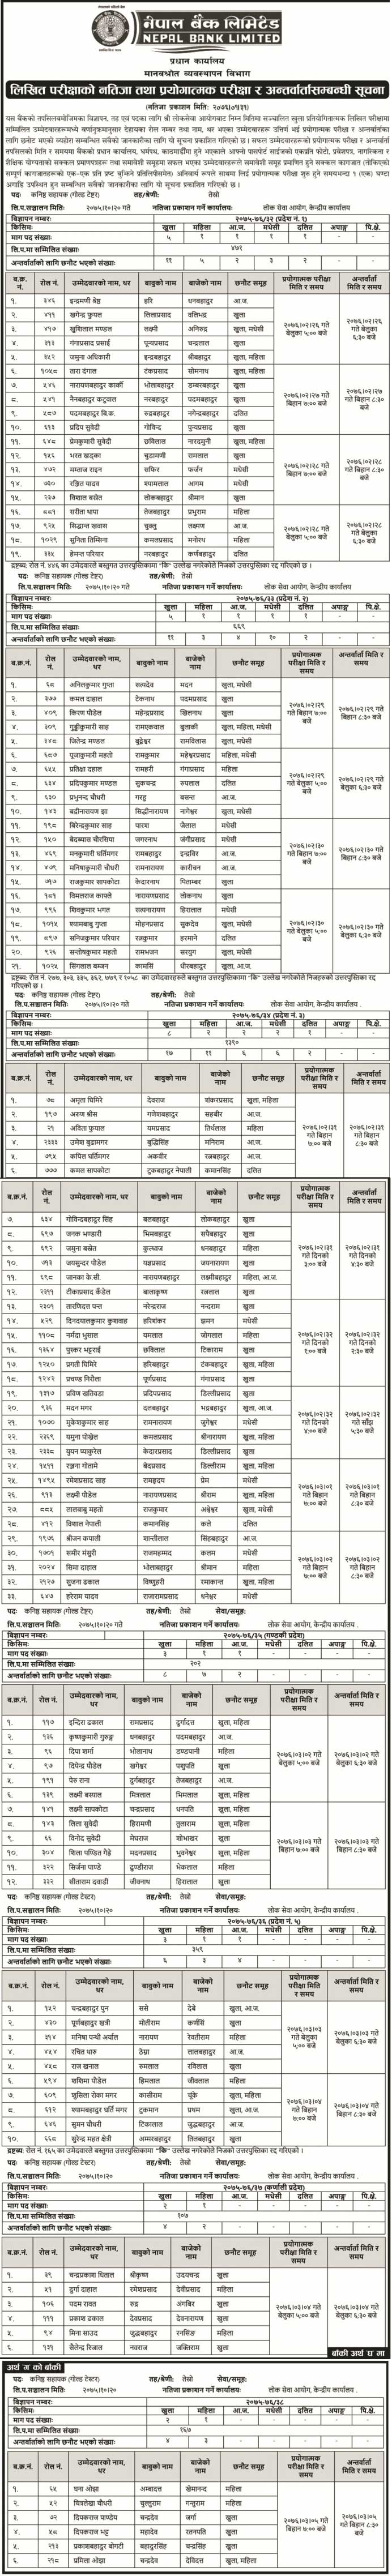 Nepal Bank Limited Written Examination Result and Interview Schedule